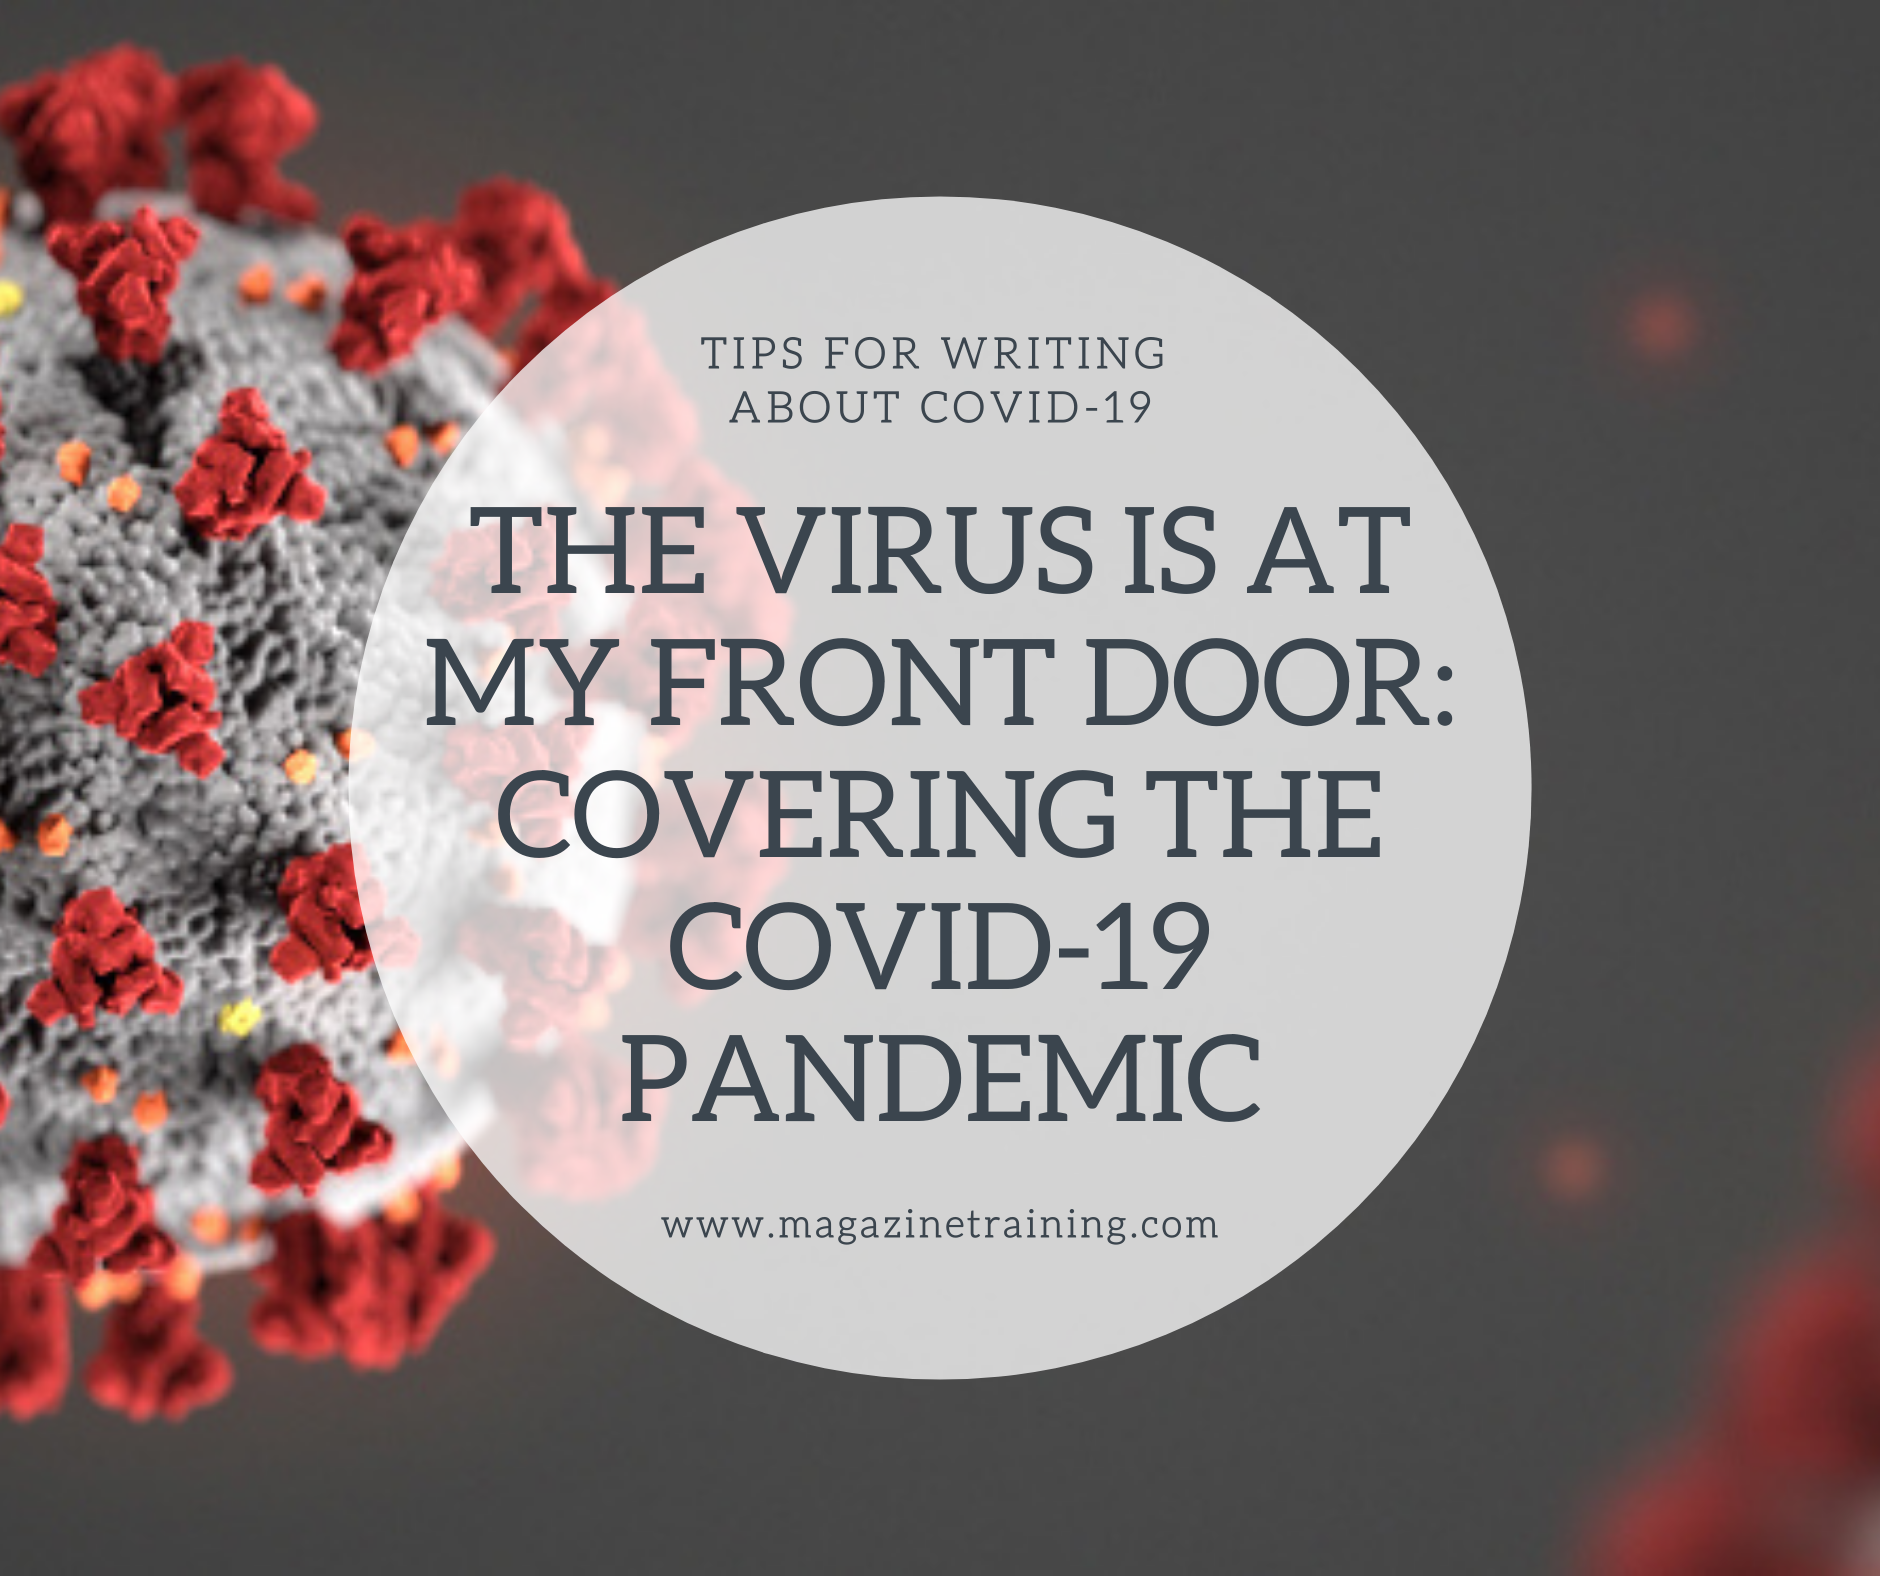 covering the pandemic